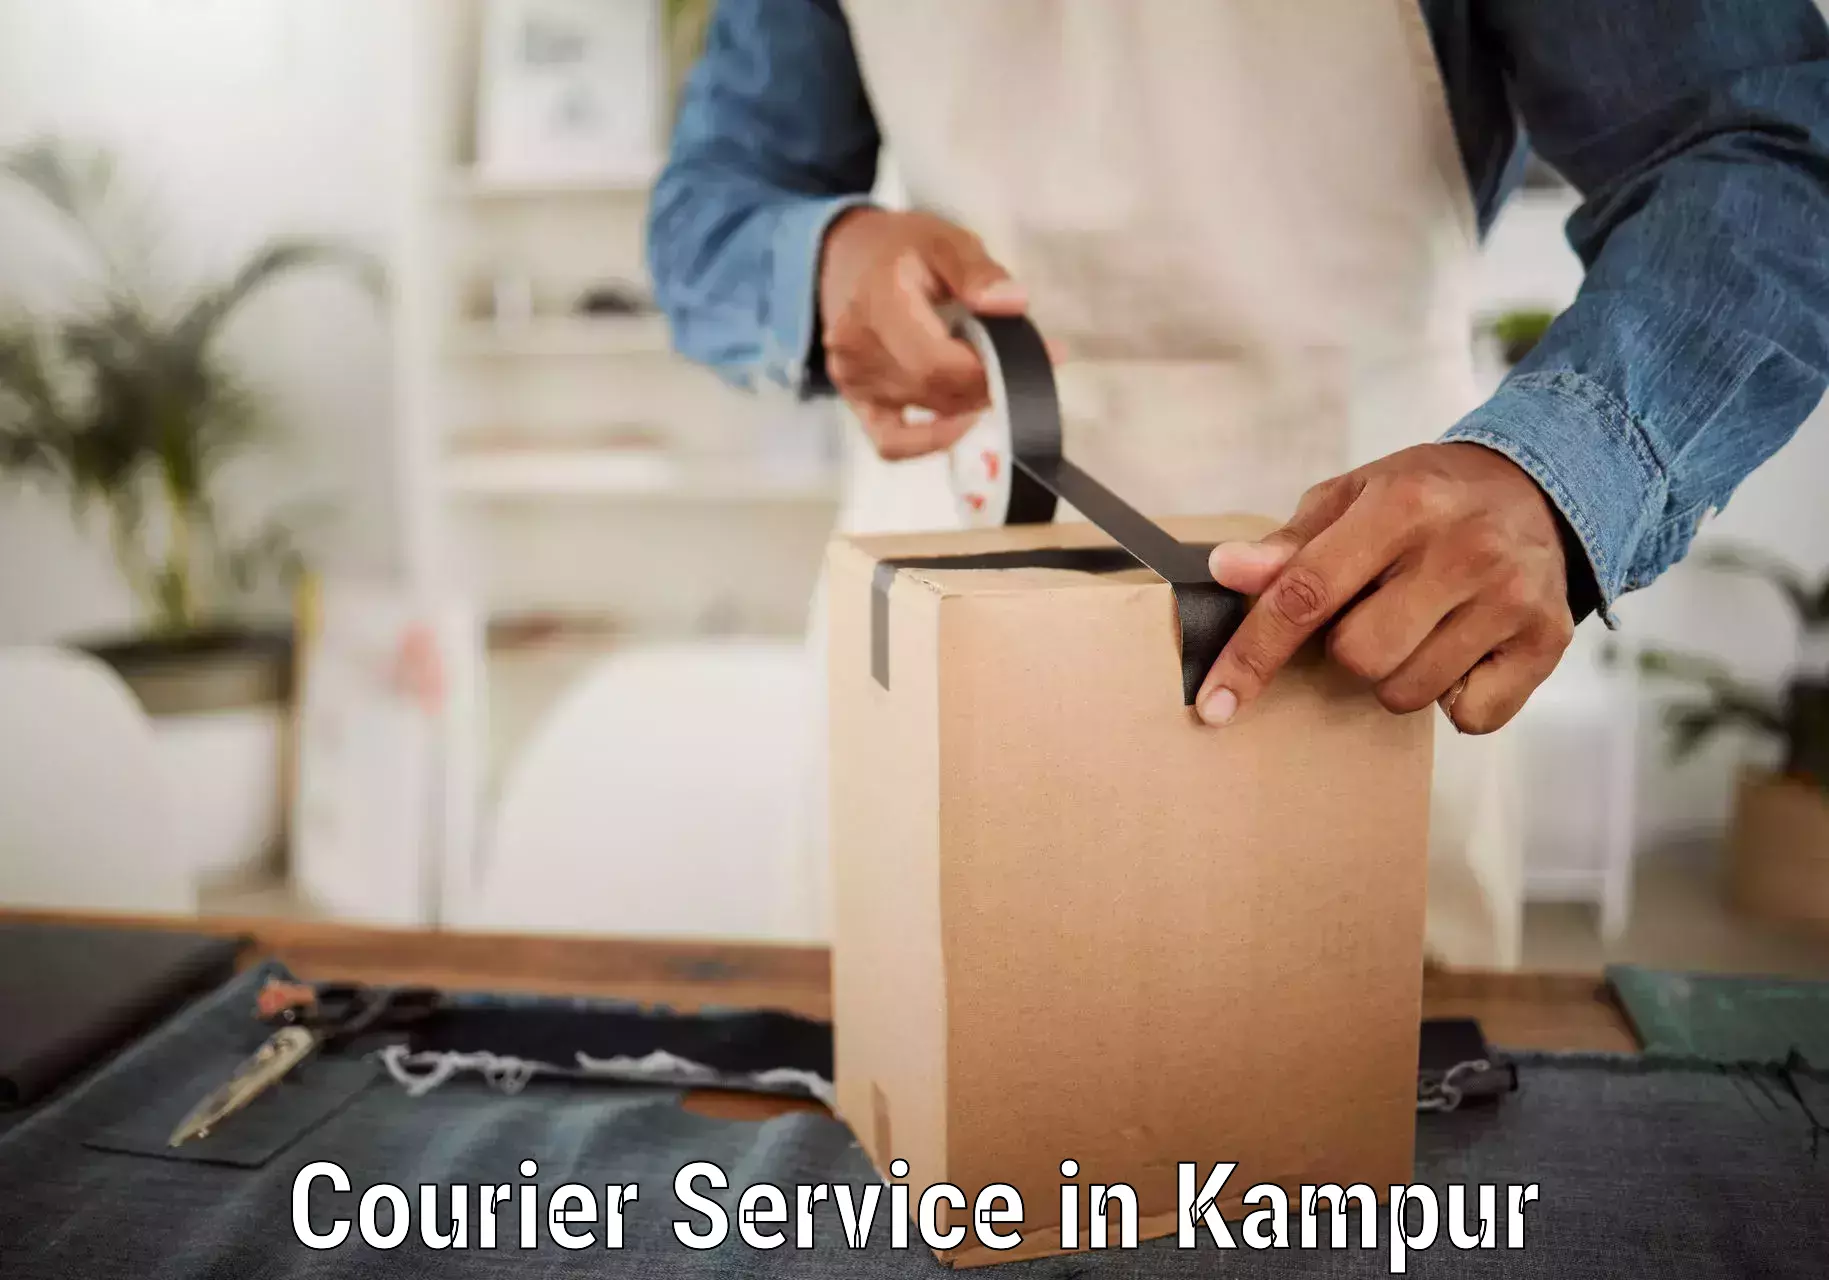 Trackable shipping service in Kampur